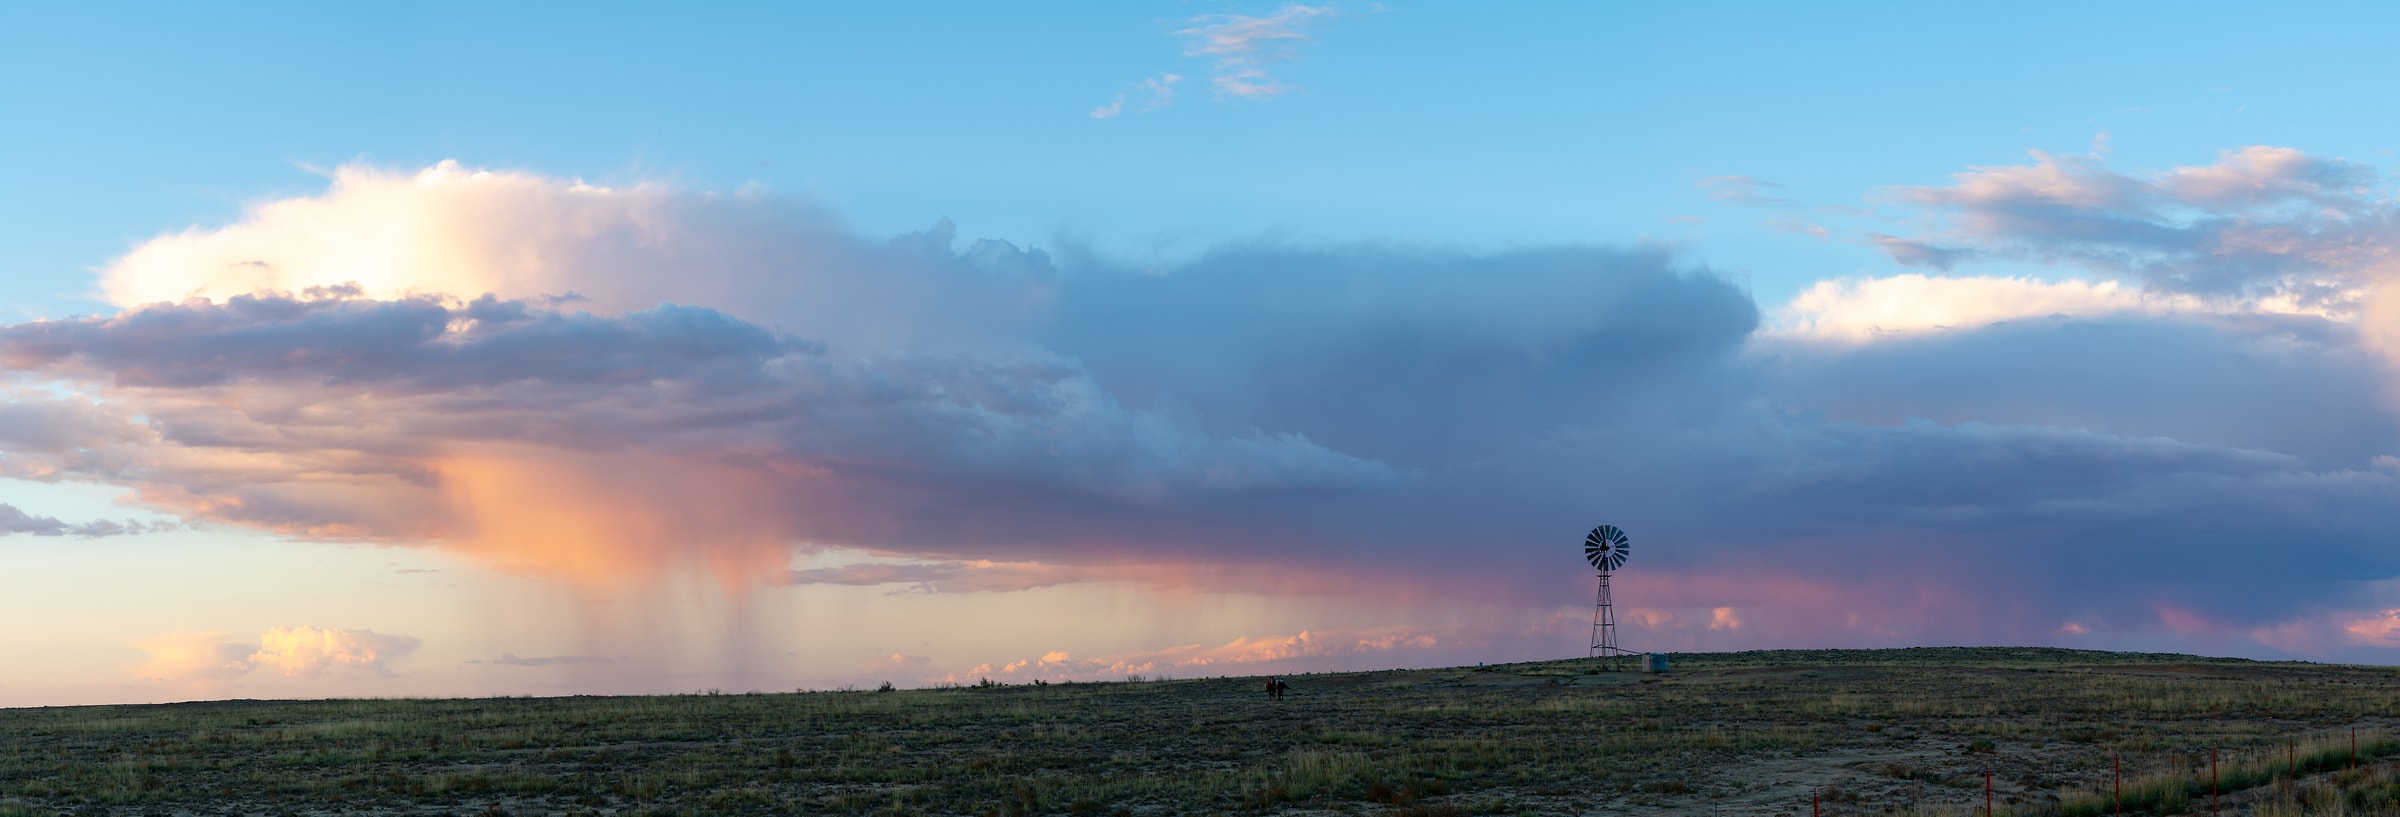 378 megapixels! A very high resolution, large-format VAST photo print of a rural landscape with a windmill and a beautiful sky at sunset; photograph created by Greg Probst in New Mexico.